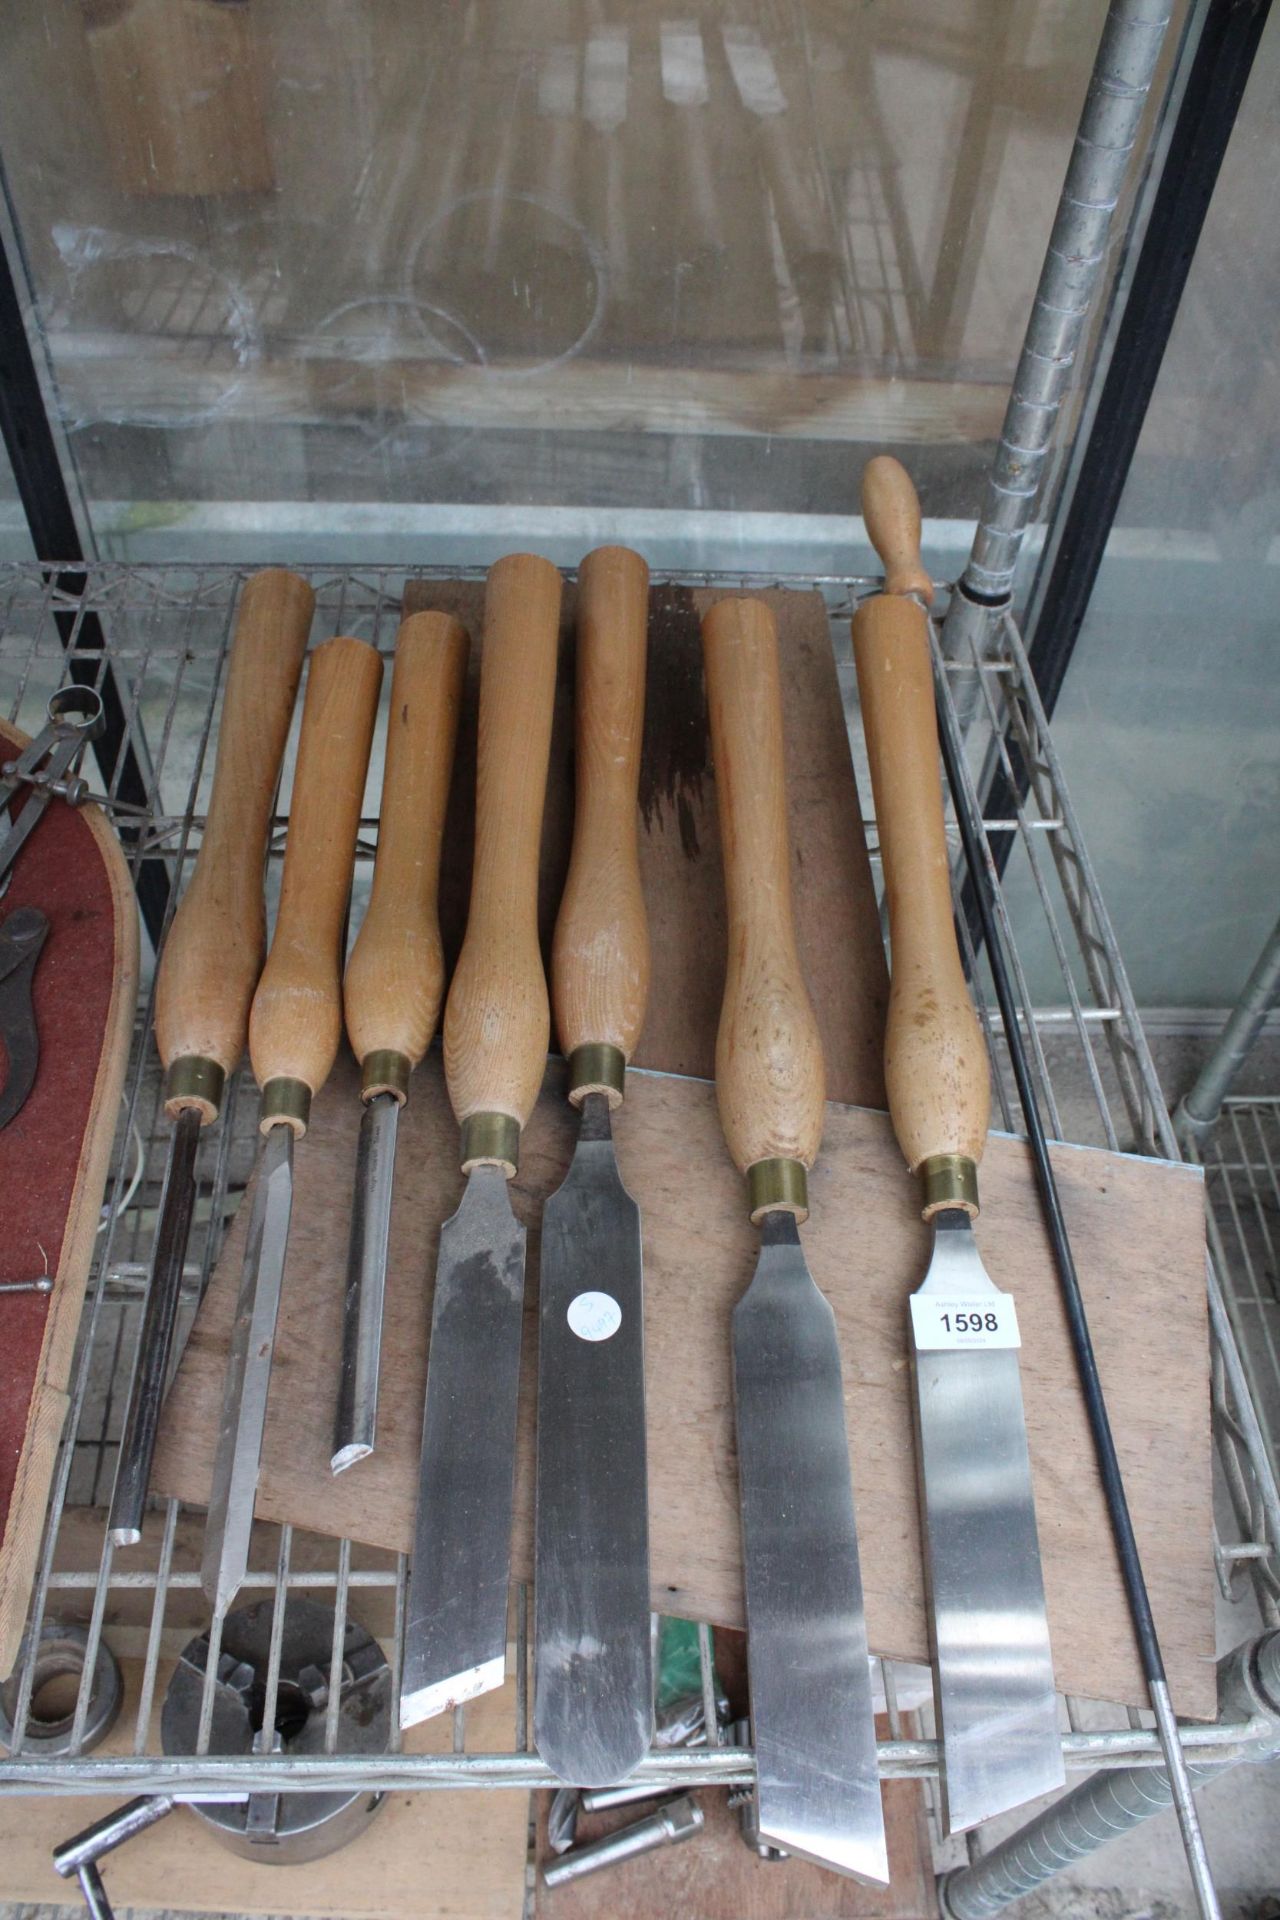 AN ASSORTMENT OF EIGHT LARGE WOODEN HANDLE LATHE TOOLS AND CHISELS